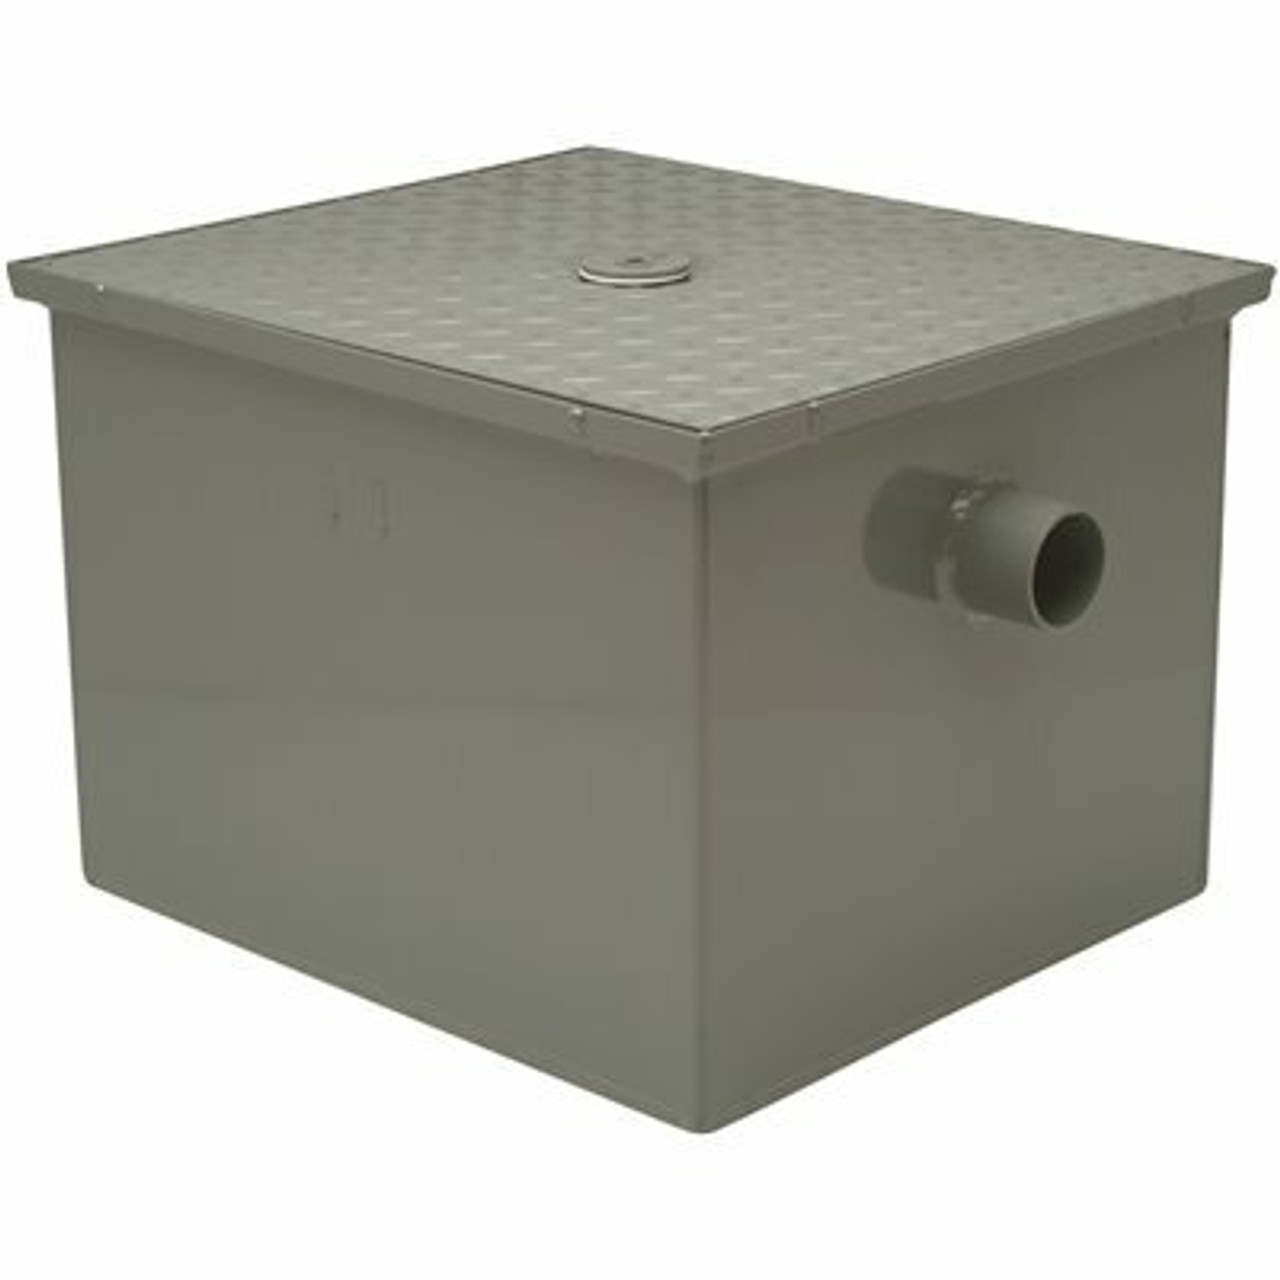 Zurn 33 In. X 23 In. Steel Grease Trap With 3 In. No Hub Inlet